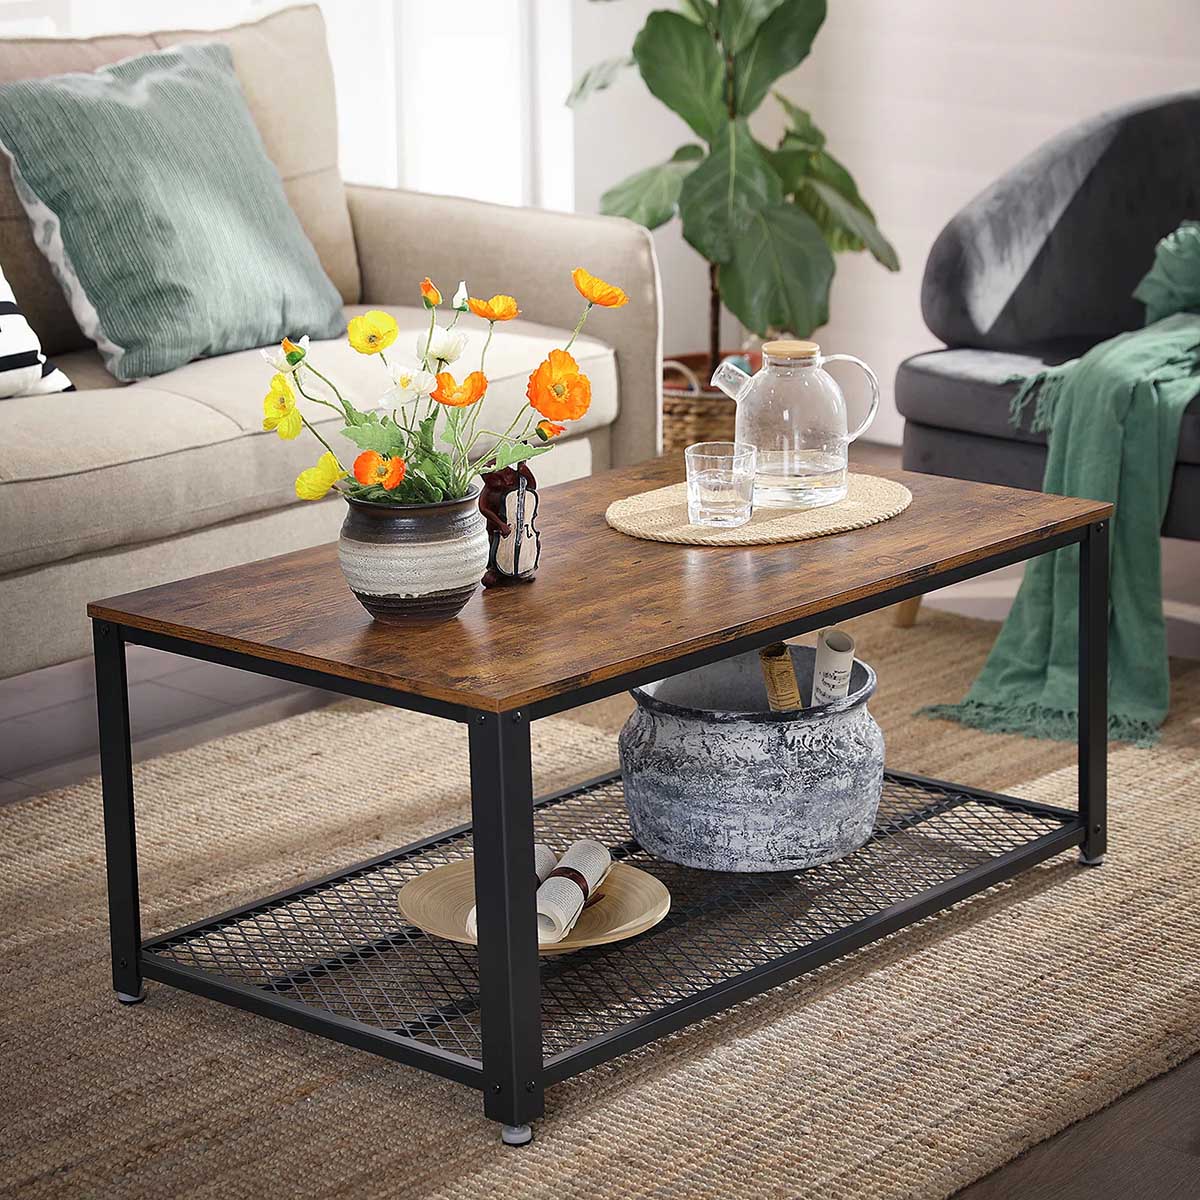 What To Put On A Coffee Table